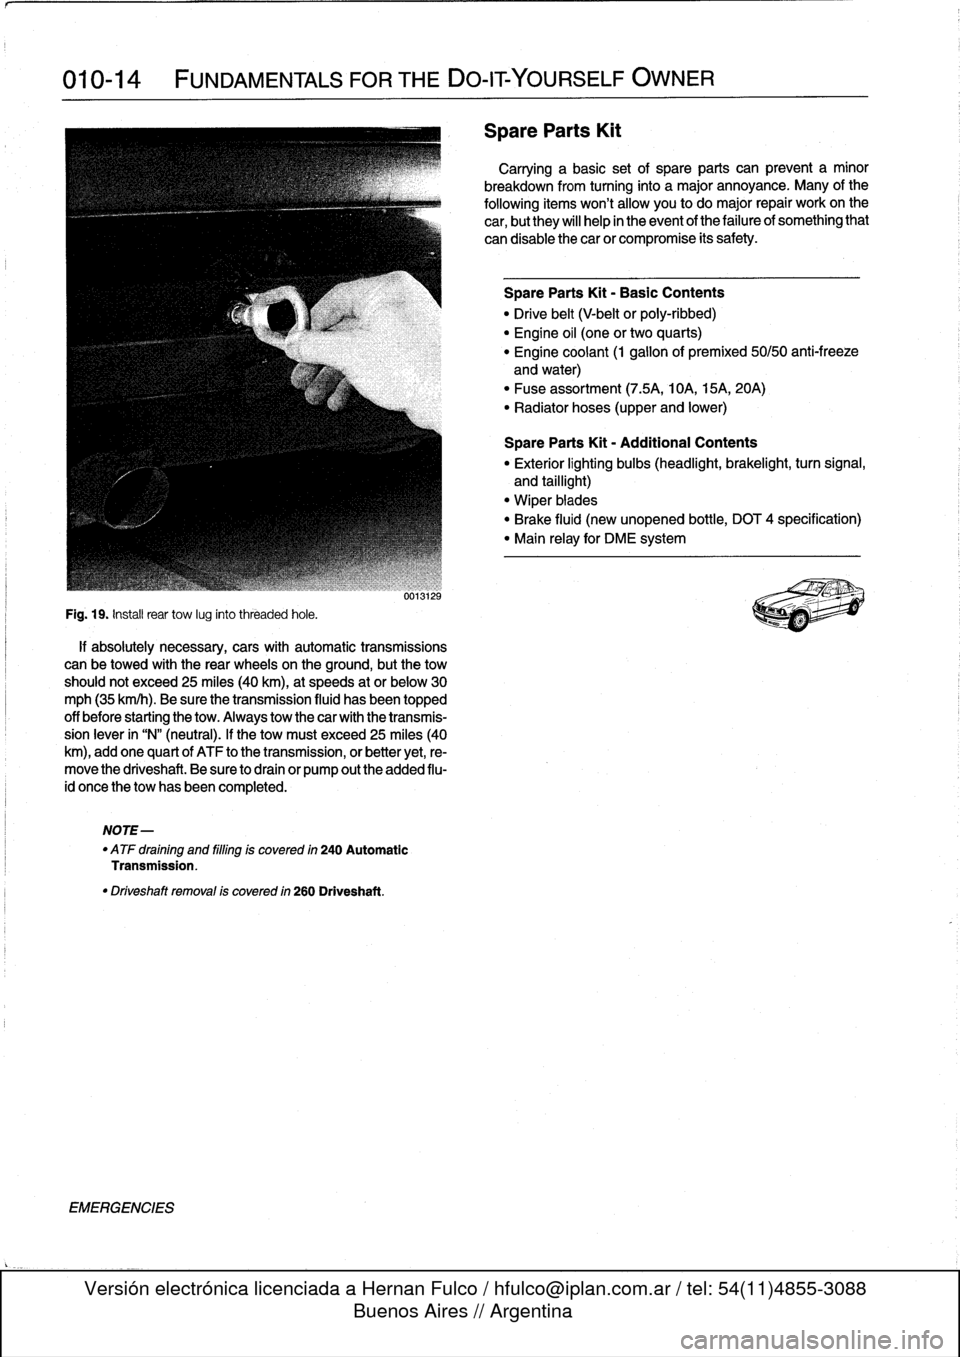 BMW 318i 1992 E36 Workshop Manual 
010-14

	

FUNDAMENTALS
FOR
THE
DO-ITYOURSELF
OWNER

Fig
.
19
.
Instaf
rear
tow
lug
into
threaded
hole
.

if
absolutely
necessary,
cars
with
automatic
transmissions
can
be
towed
with
the
rear
wheels
